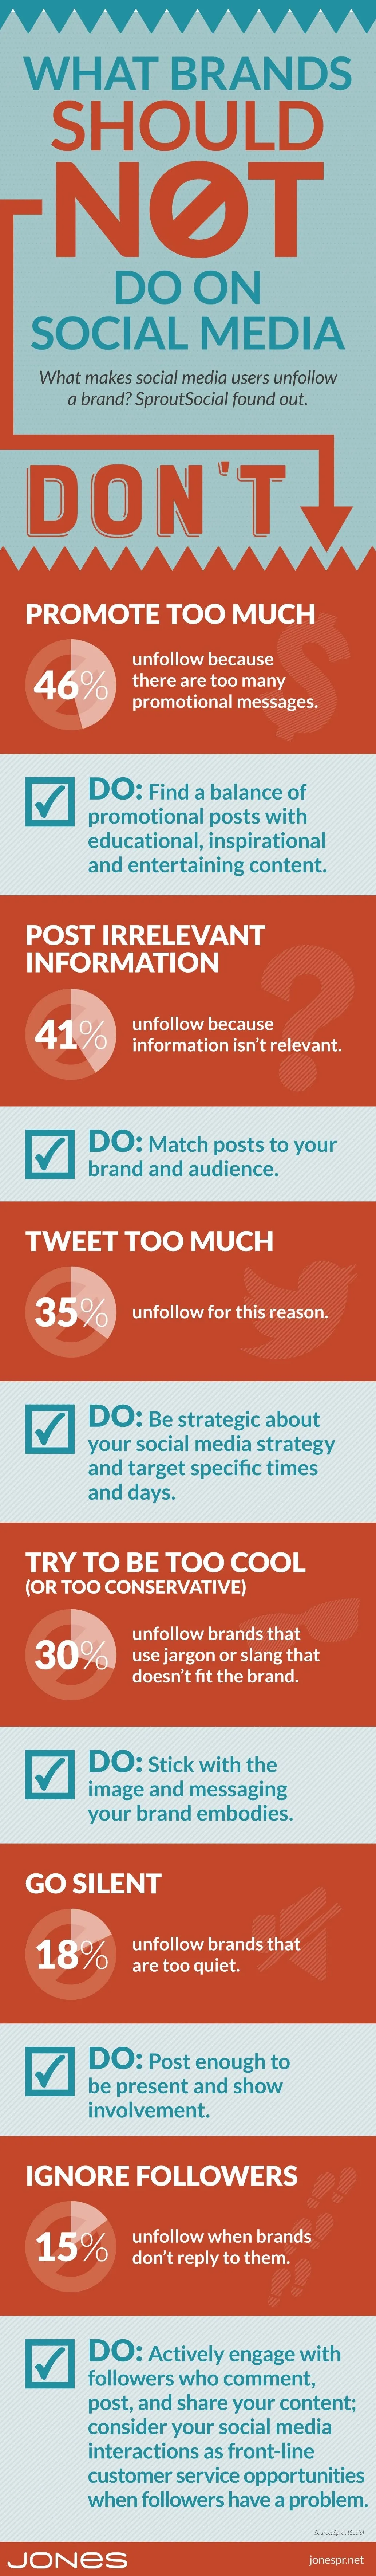 What Brands Shouldn’t Do on Social Media [infographic]